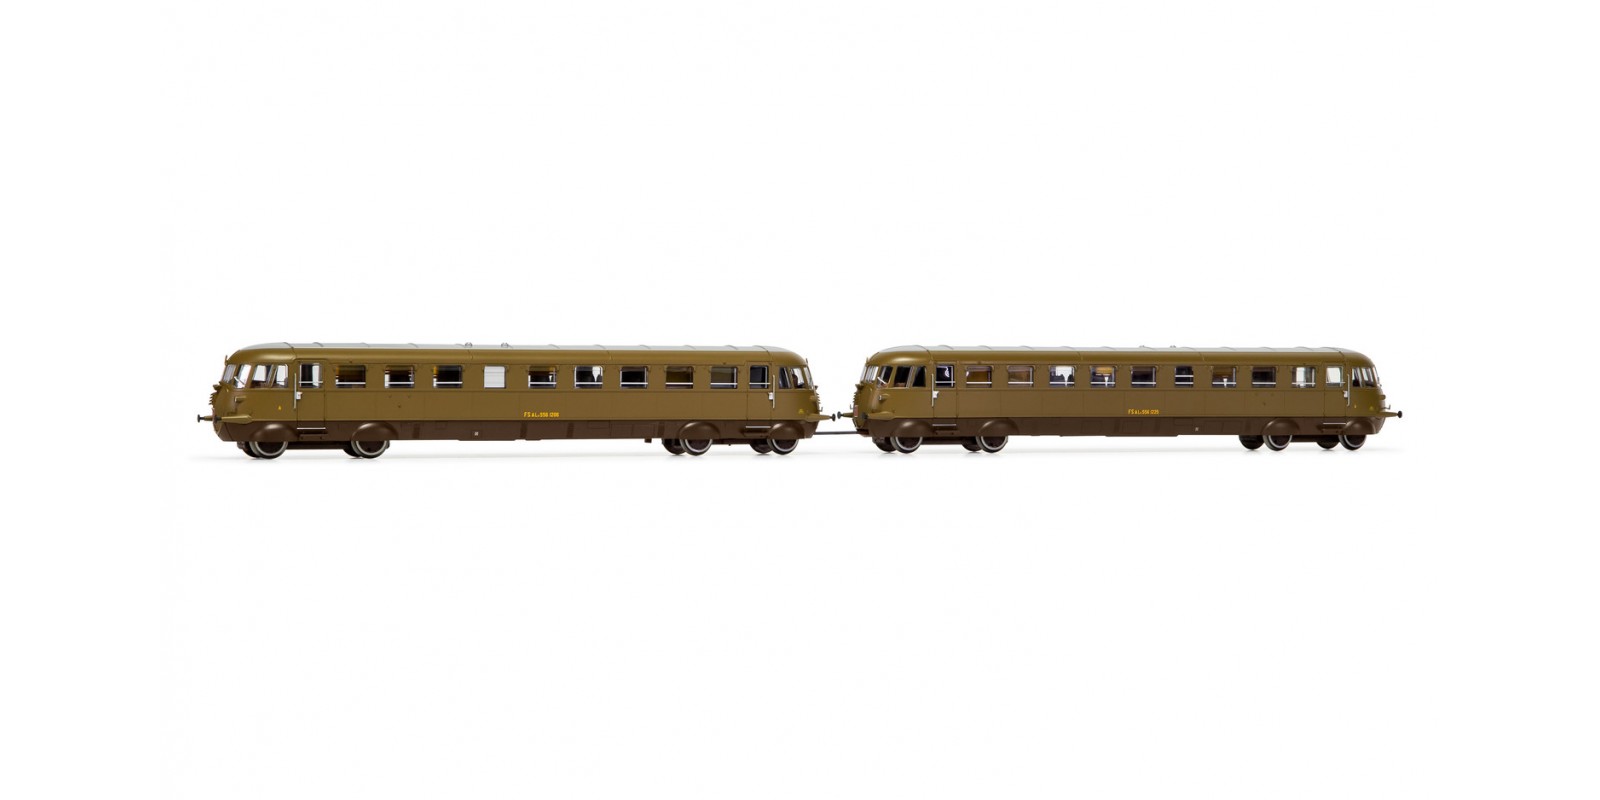 RI2748 FS, diesel railcars Aln 556 first series, castano / isabella livery, set with 2 units, 1206 motorized + 1225 unmotorized, period III-IV